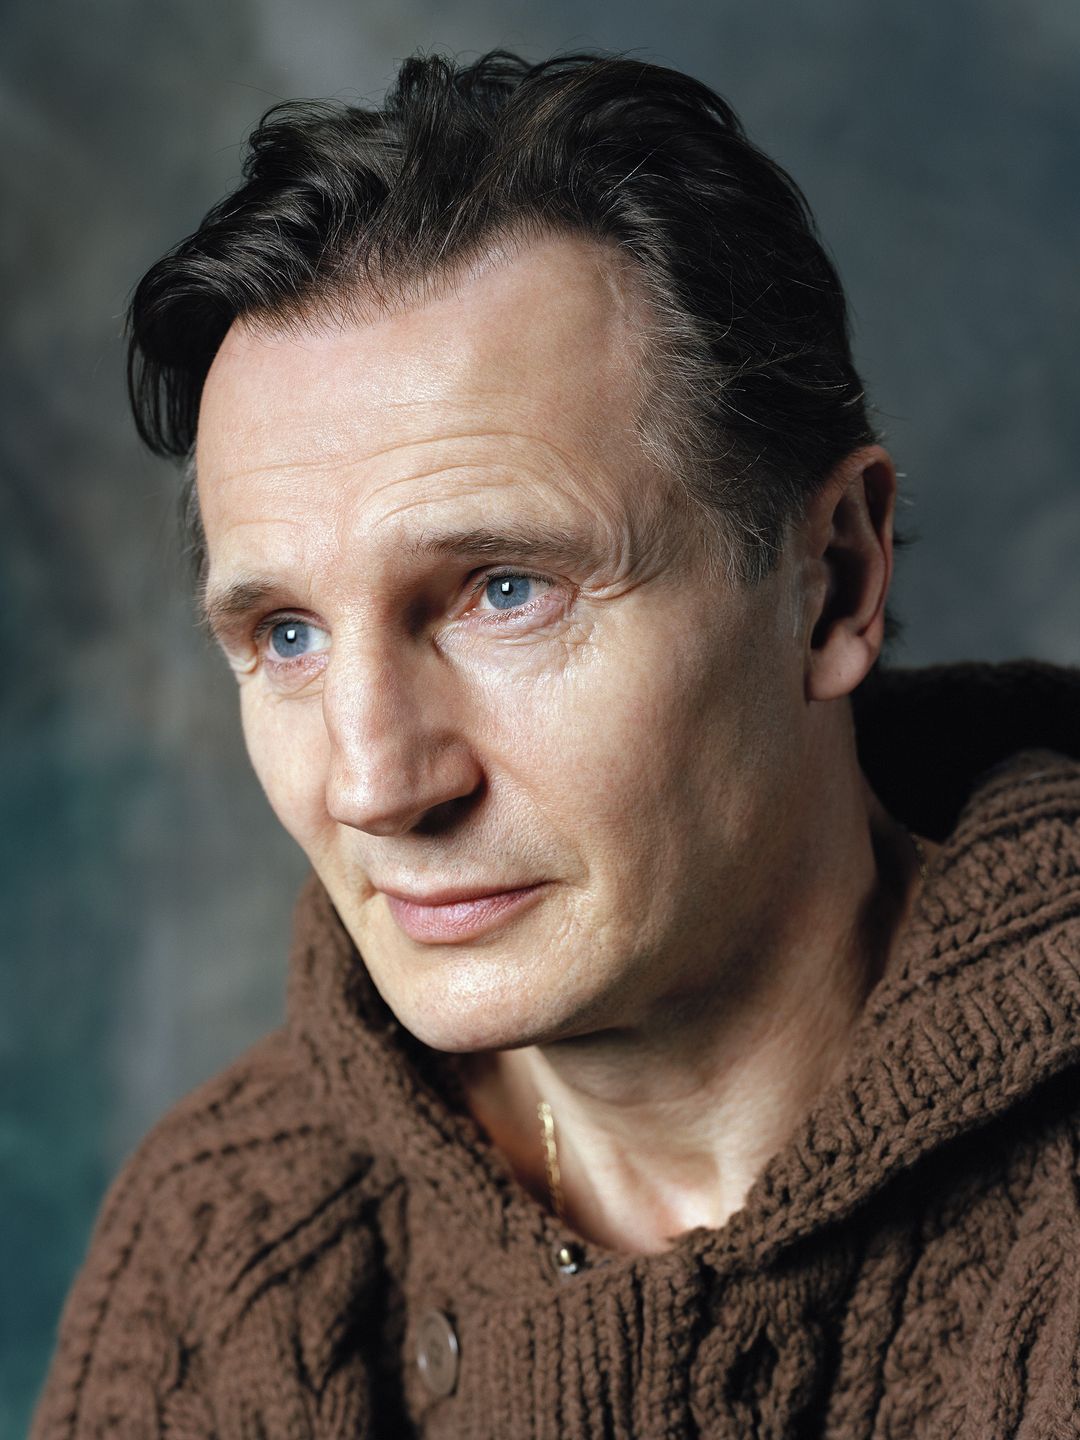 Liam Neeson in real life